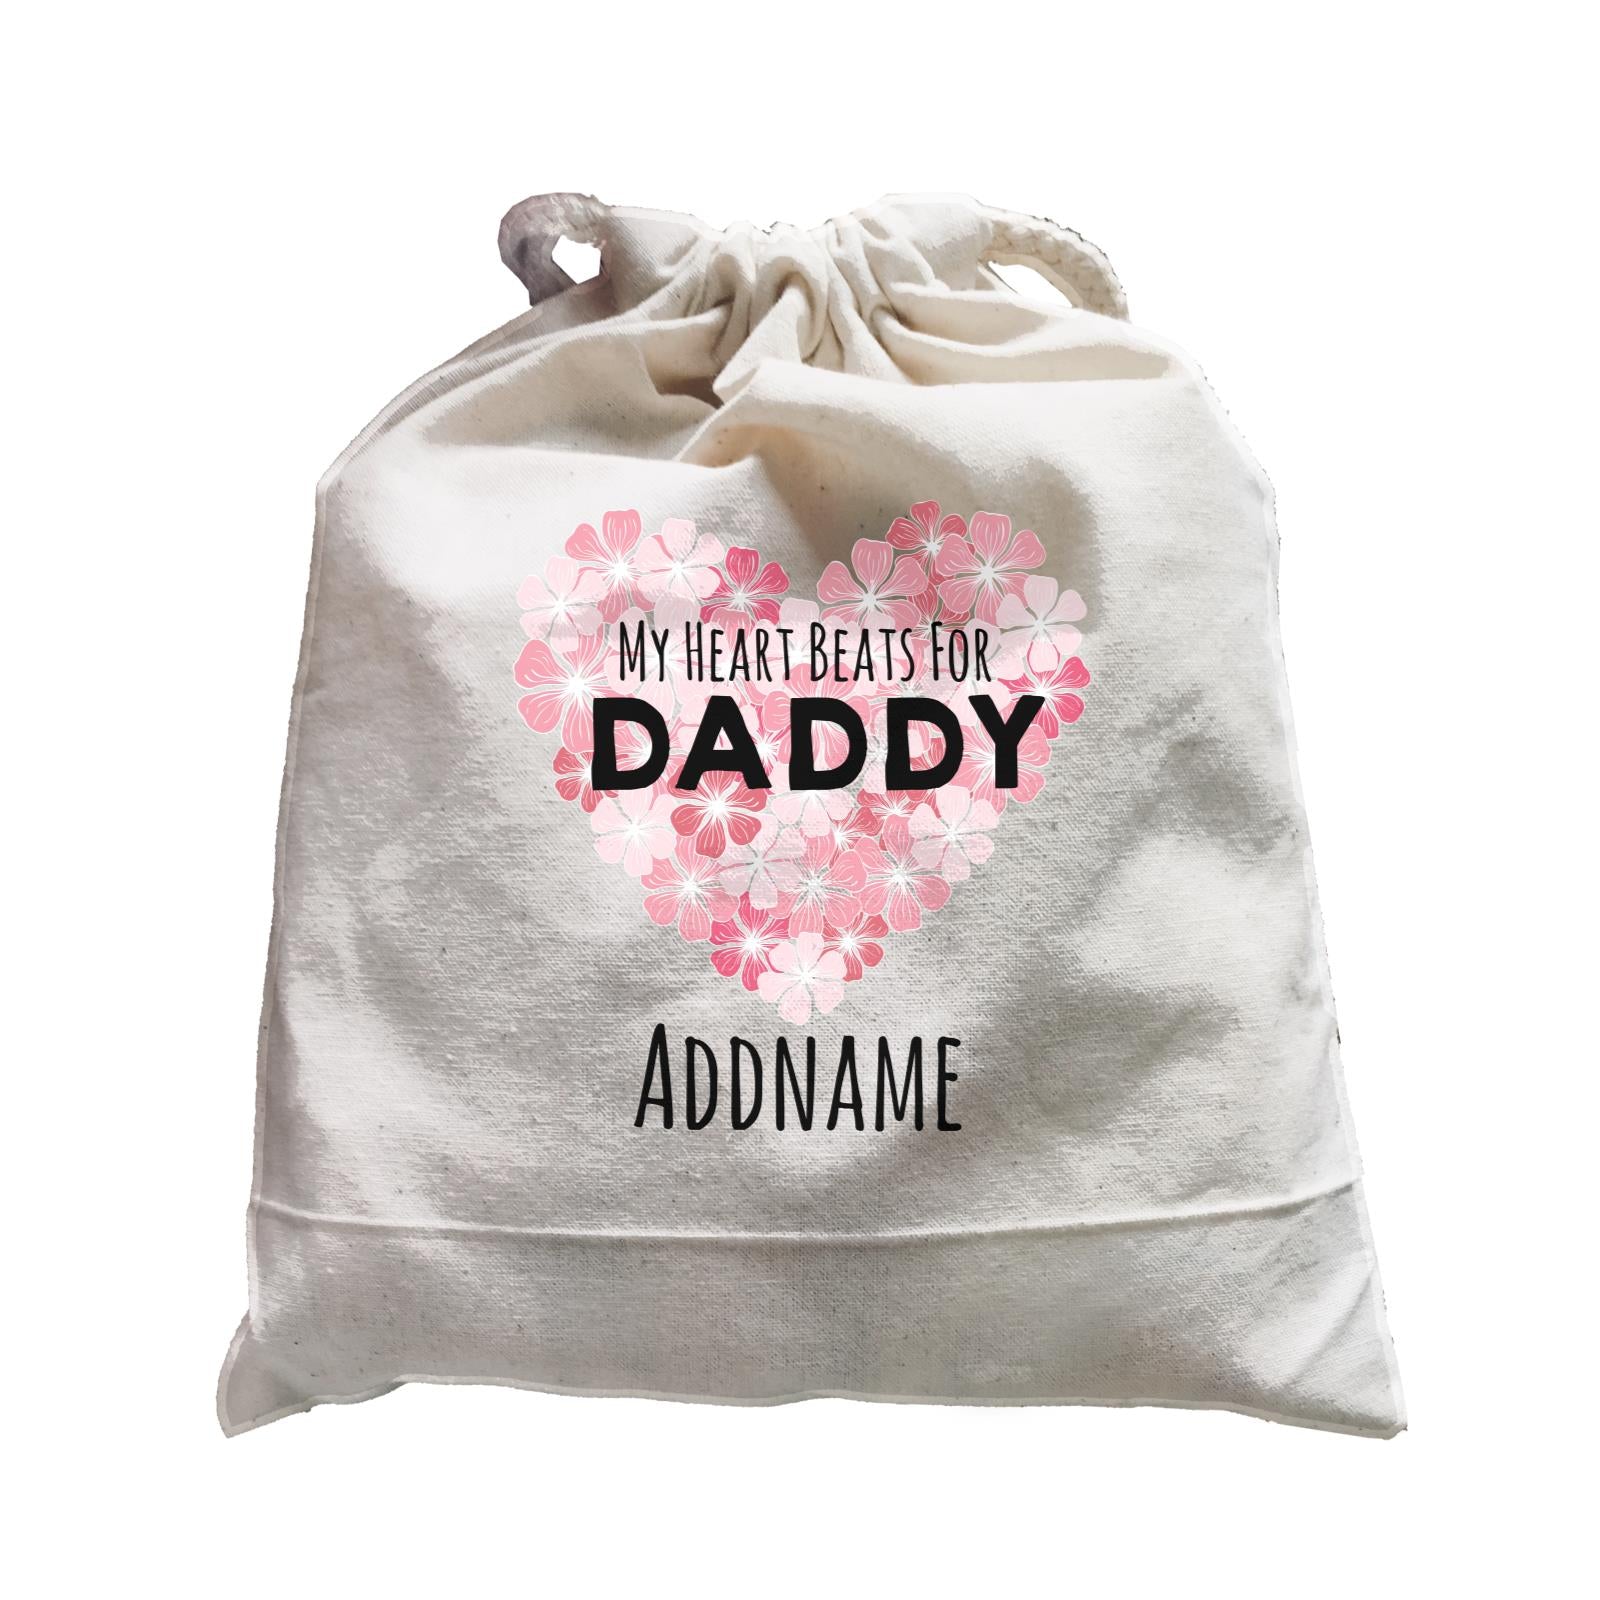 Drawn Mom & Dad Love Heart Beats for Daddy Addname Satchel